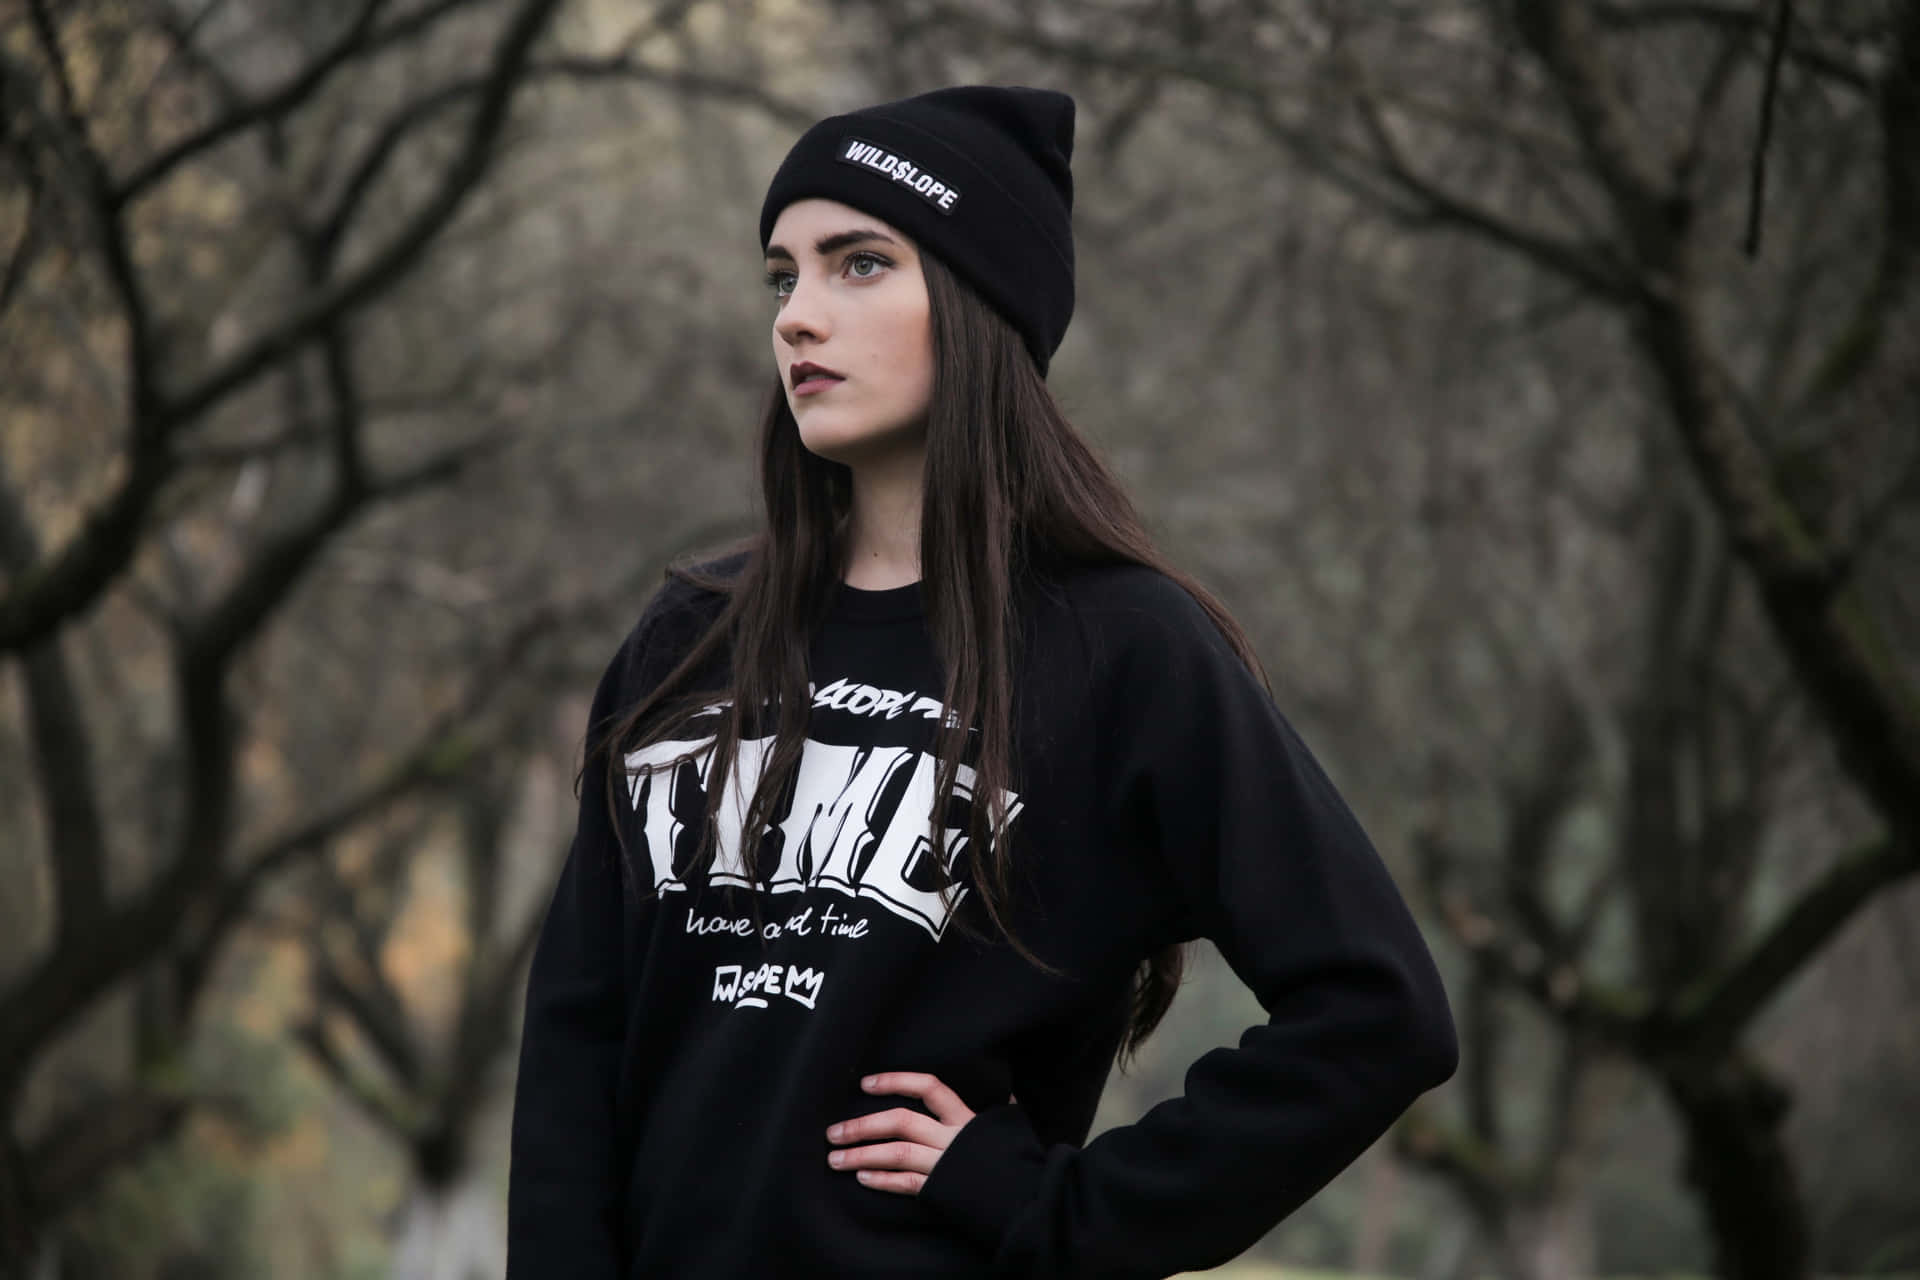 A Young Woman Wearing A Black Sweatshirt And Beanie Wallpaper